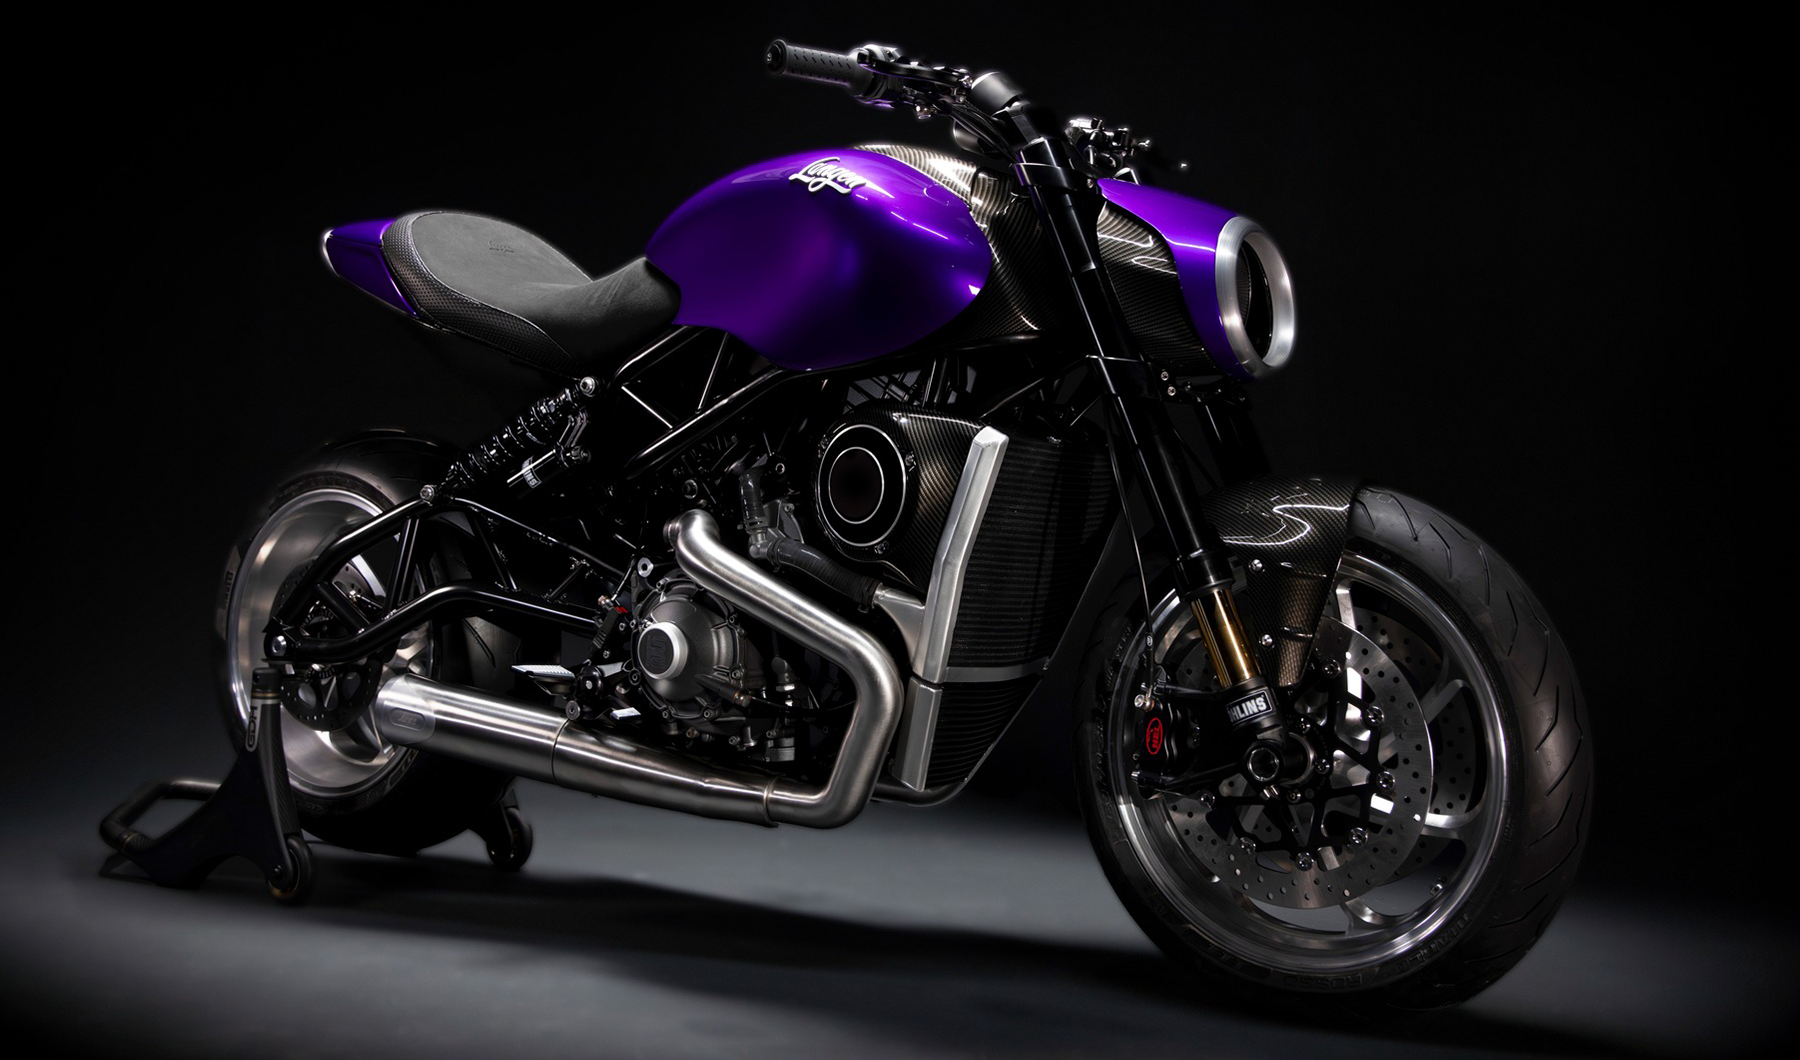 FROM CONCEPT TO PRODUCTION: LANGEN MOTORCYCLES